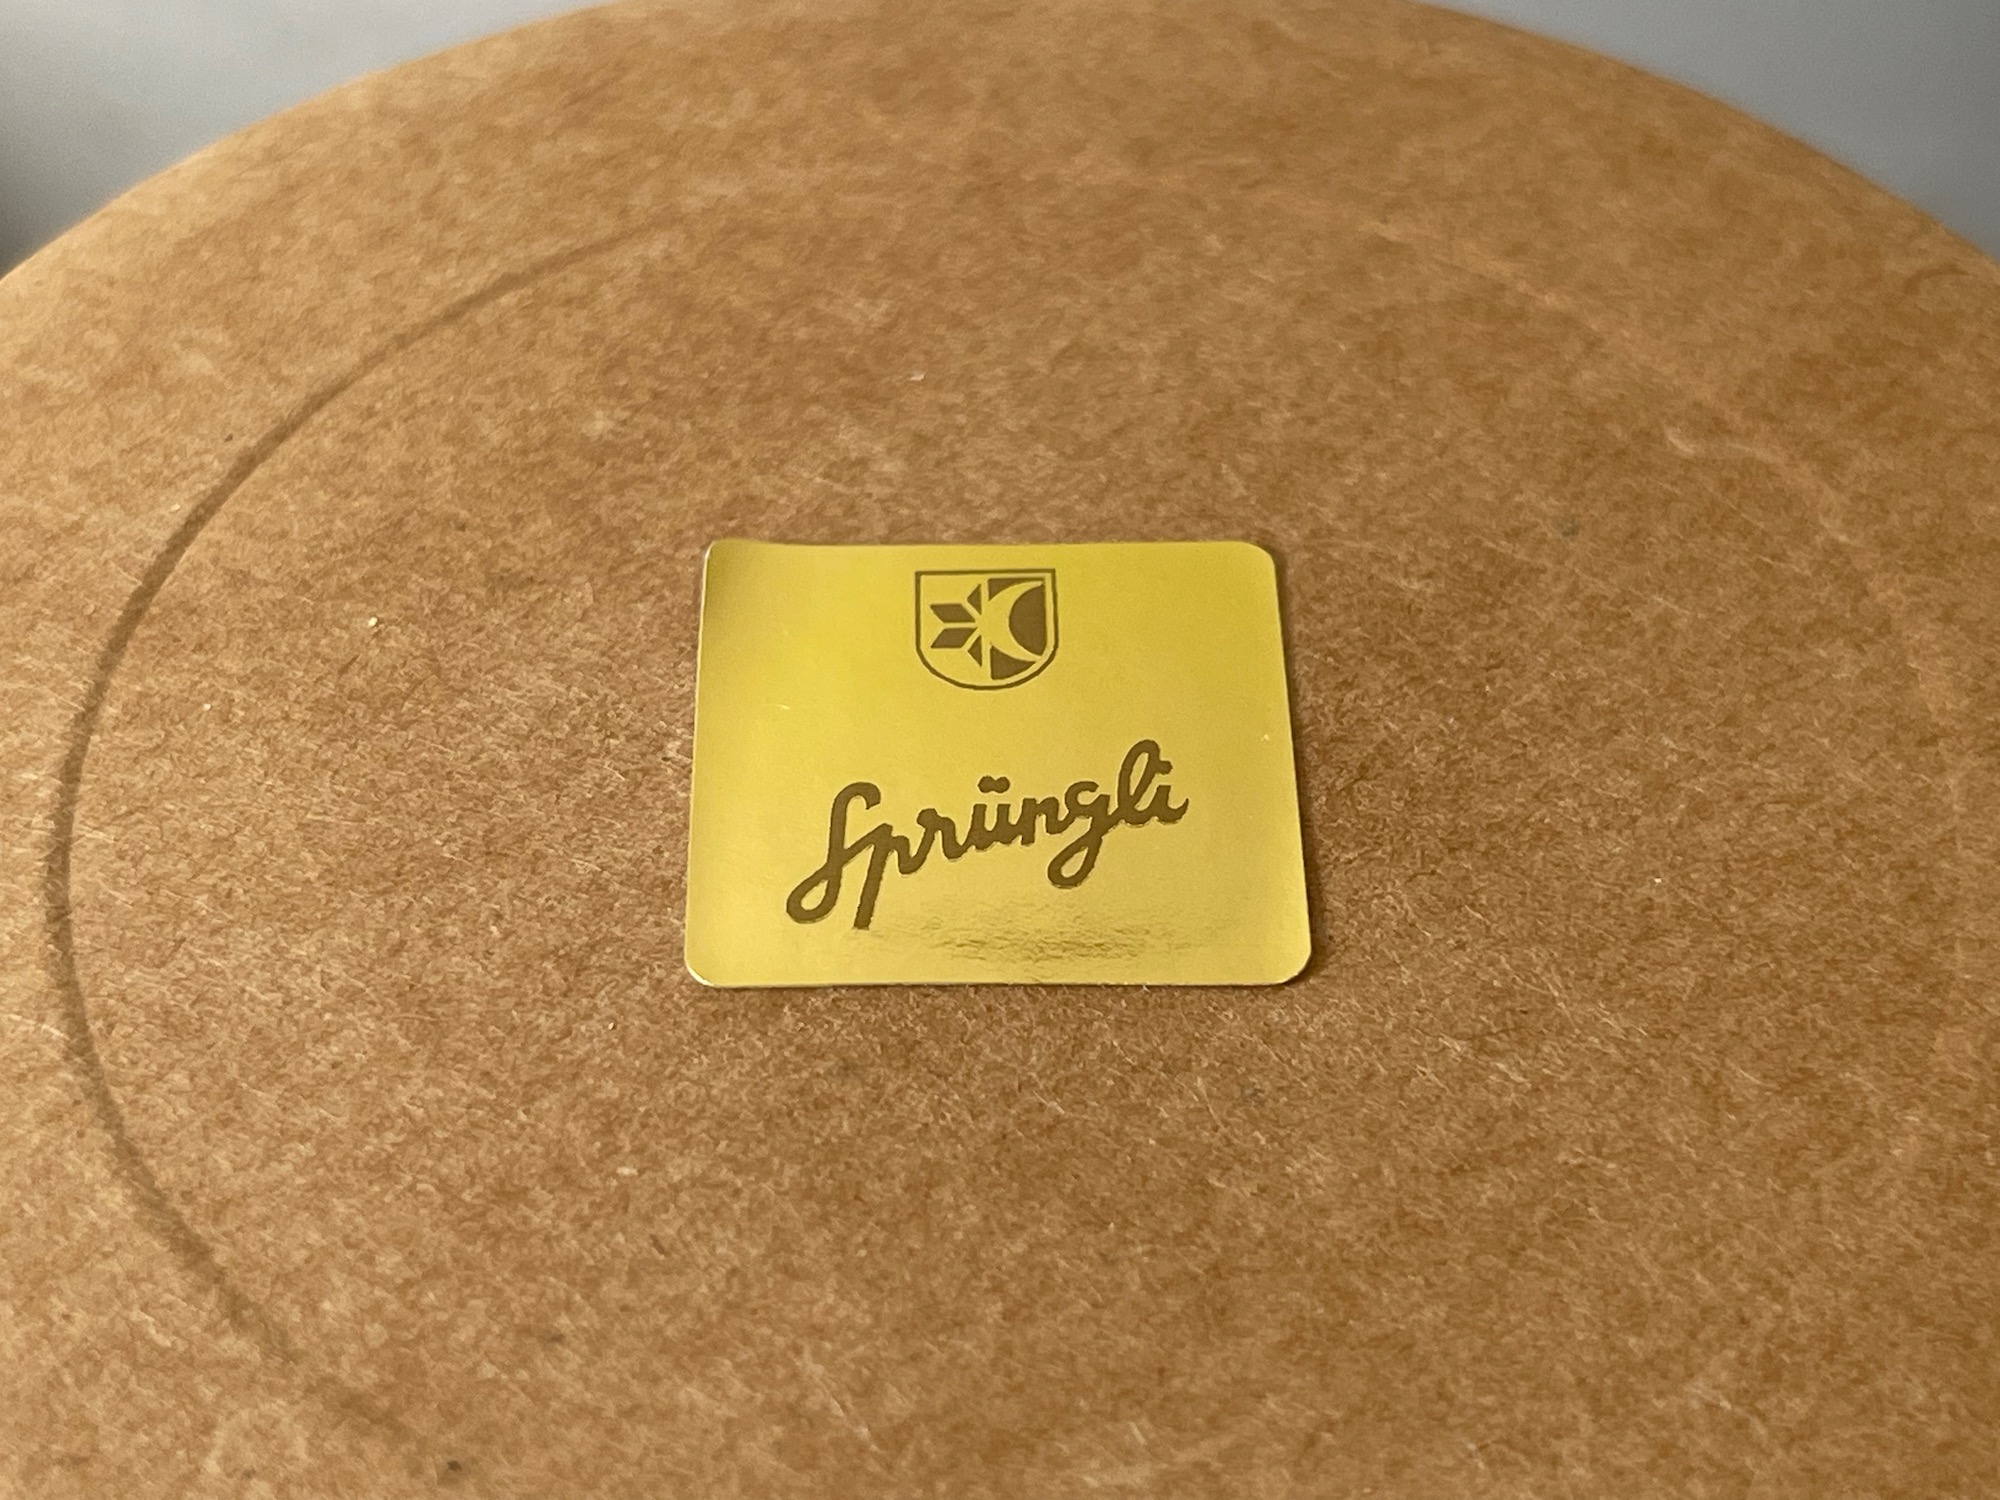 a yellow square sticker on a brown surface